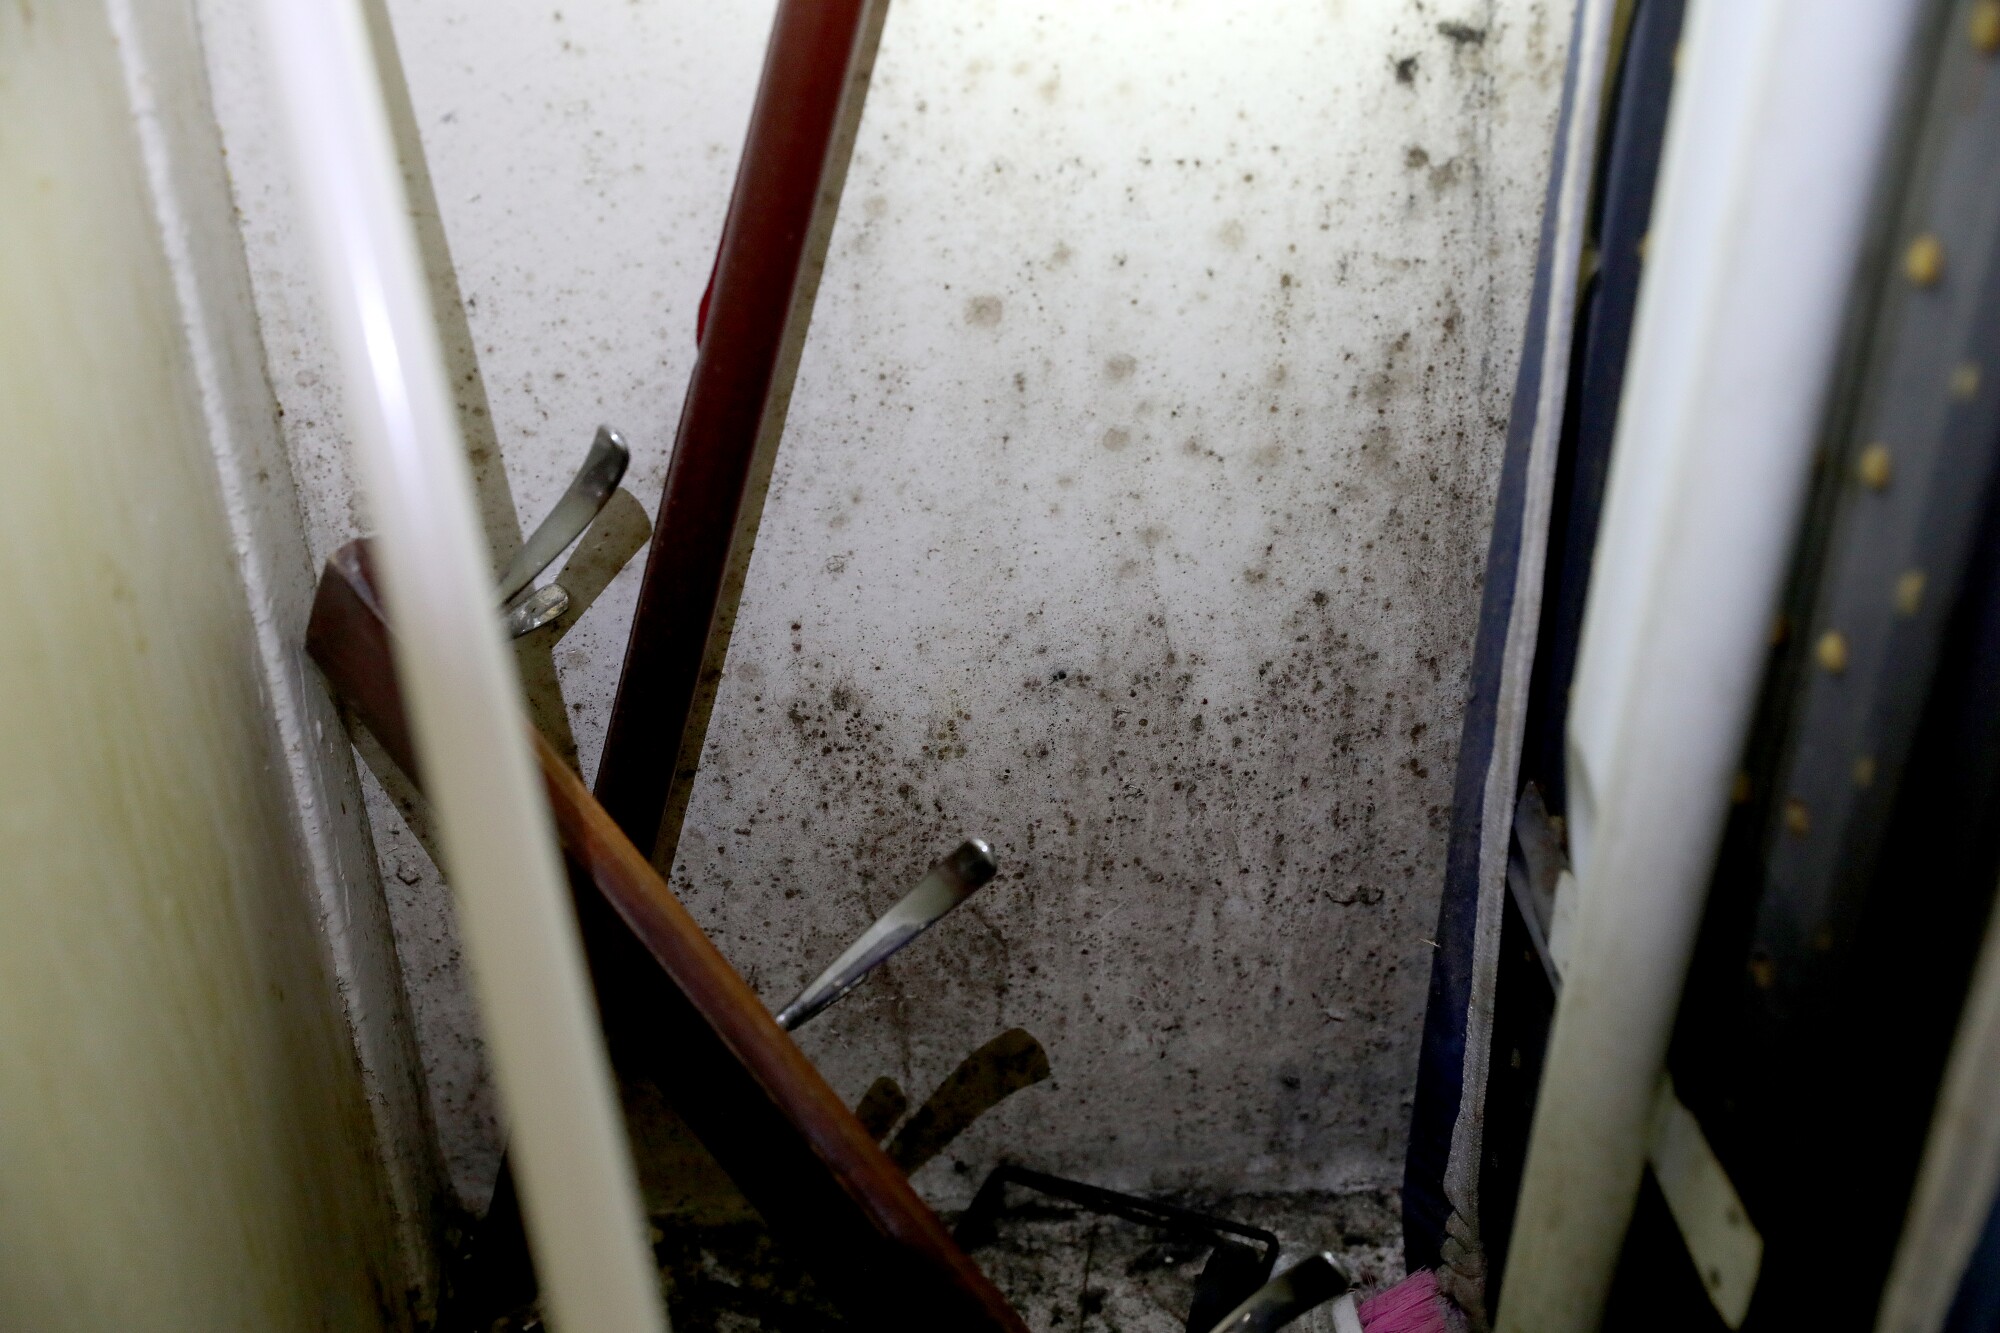 What appears to be mold in a kitchen closet at the Chesapeake Apartments.